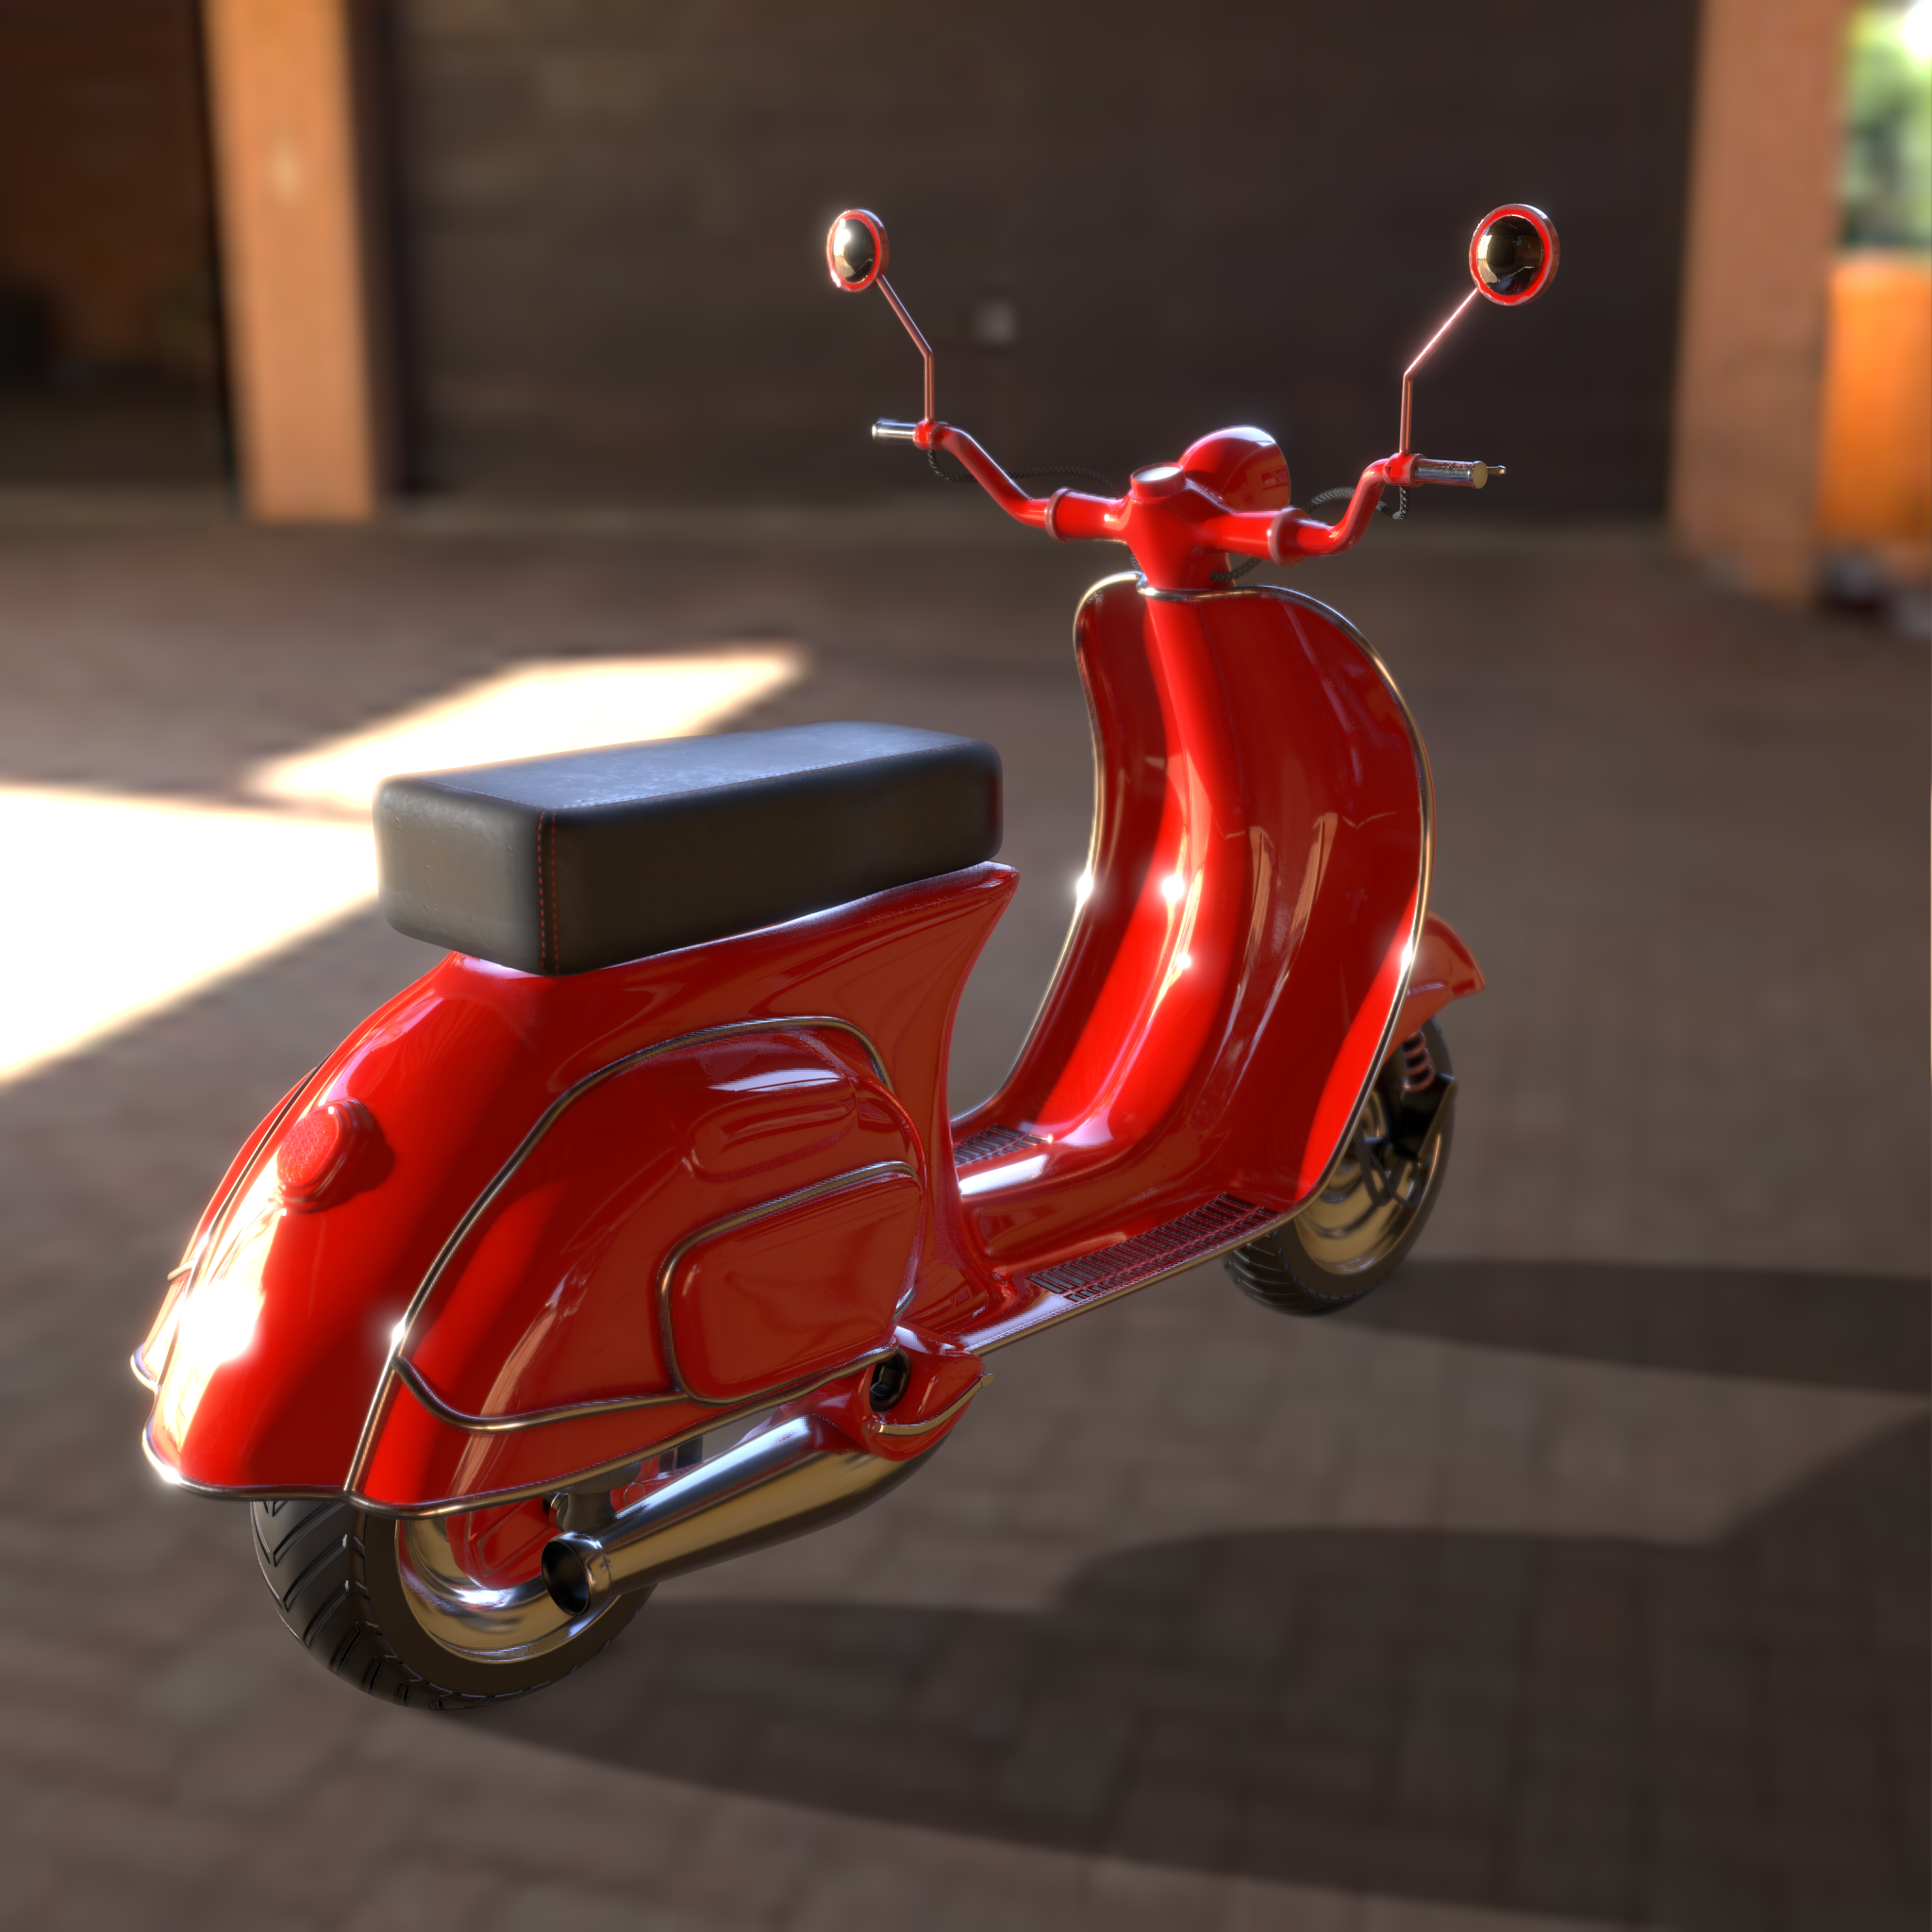 Scooter Textured preview image 1